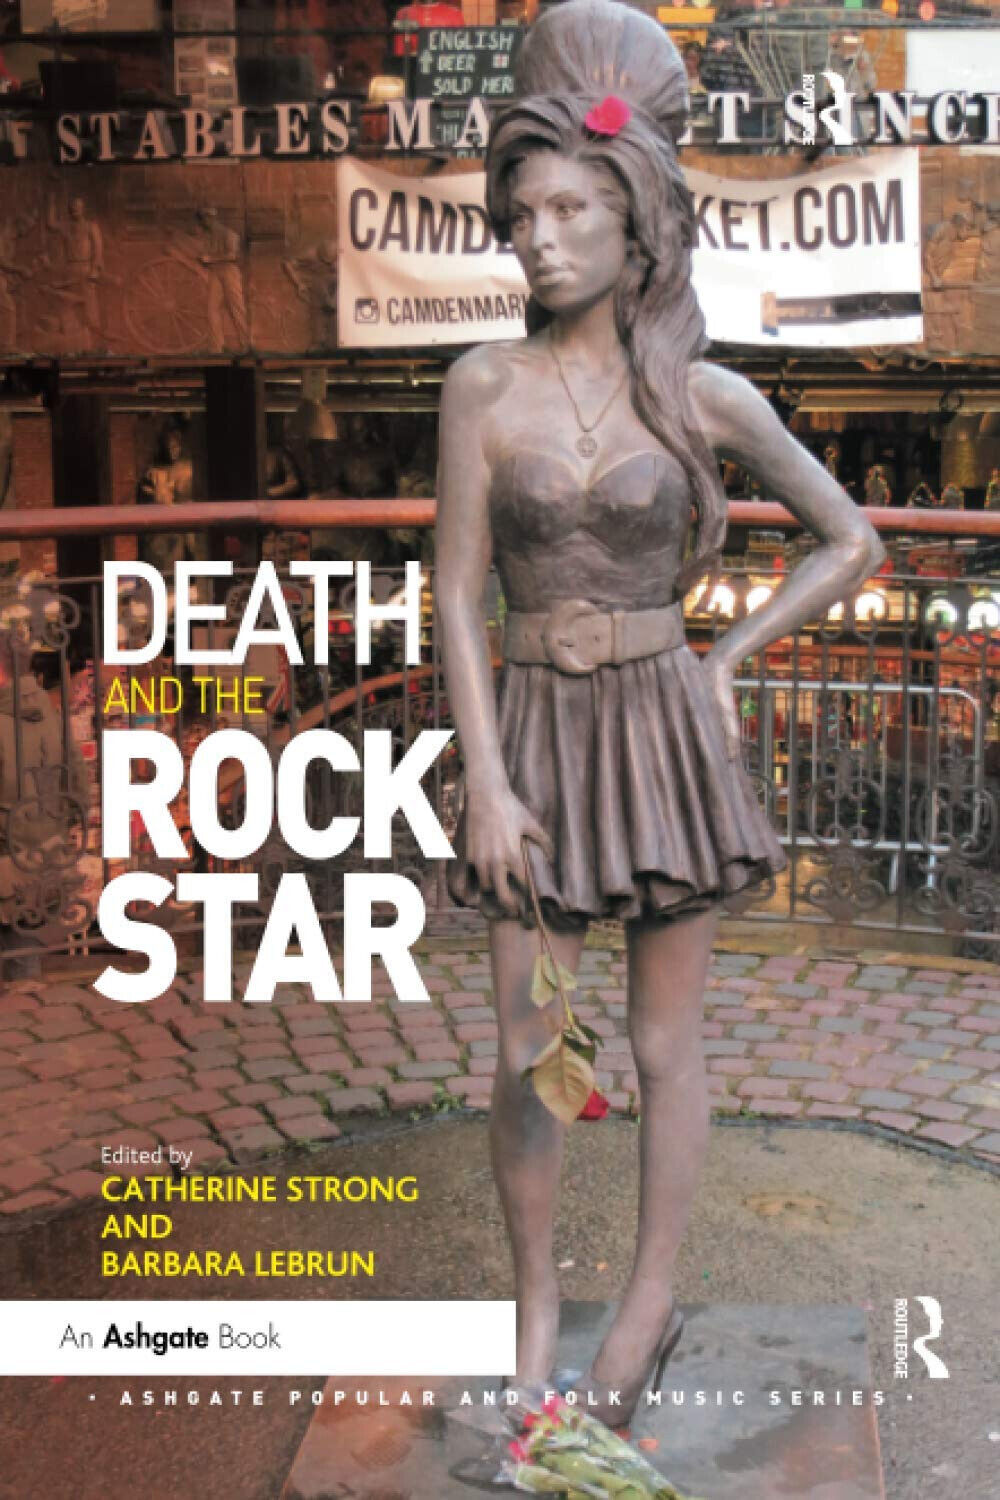 Death And The Rock Star - Catherine Strong, Barbara Lebrun - 2020